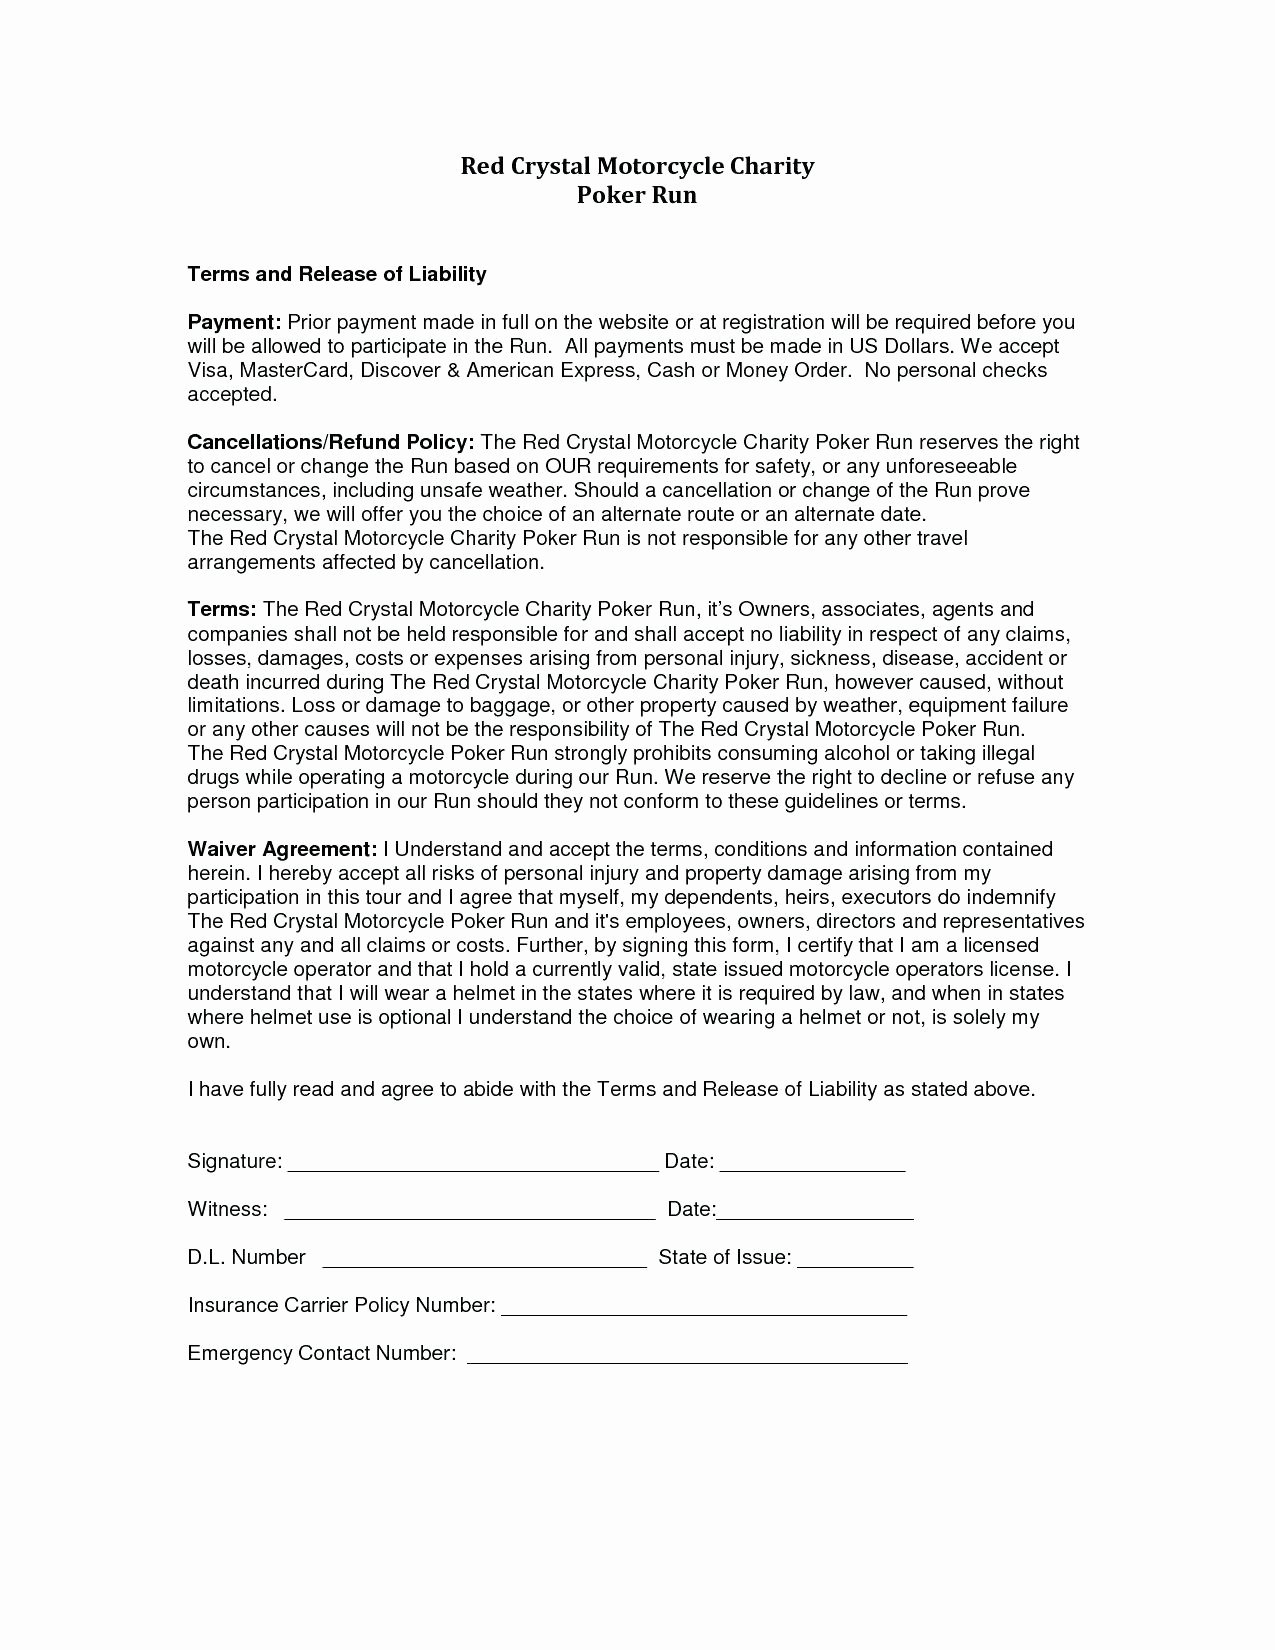 Liability Release Letter Damage Waiver form Property